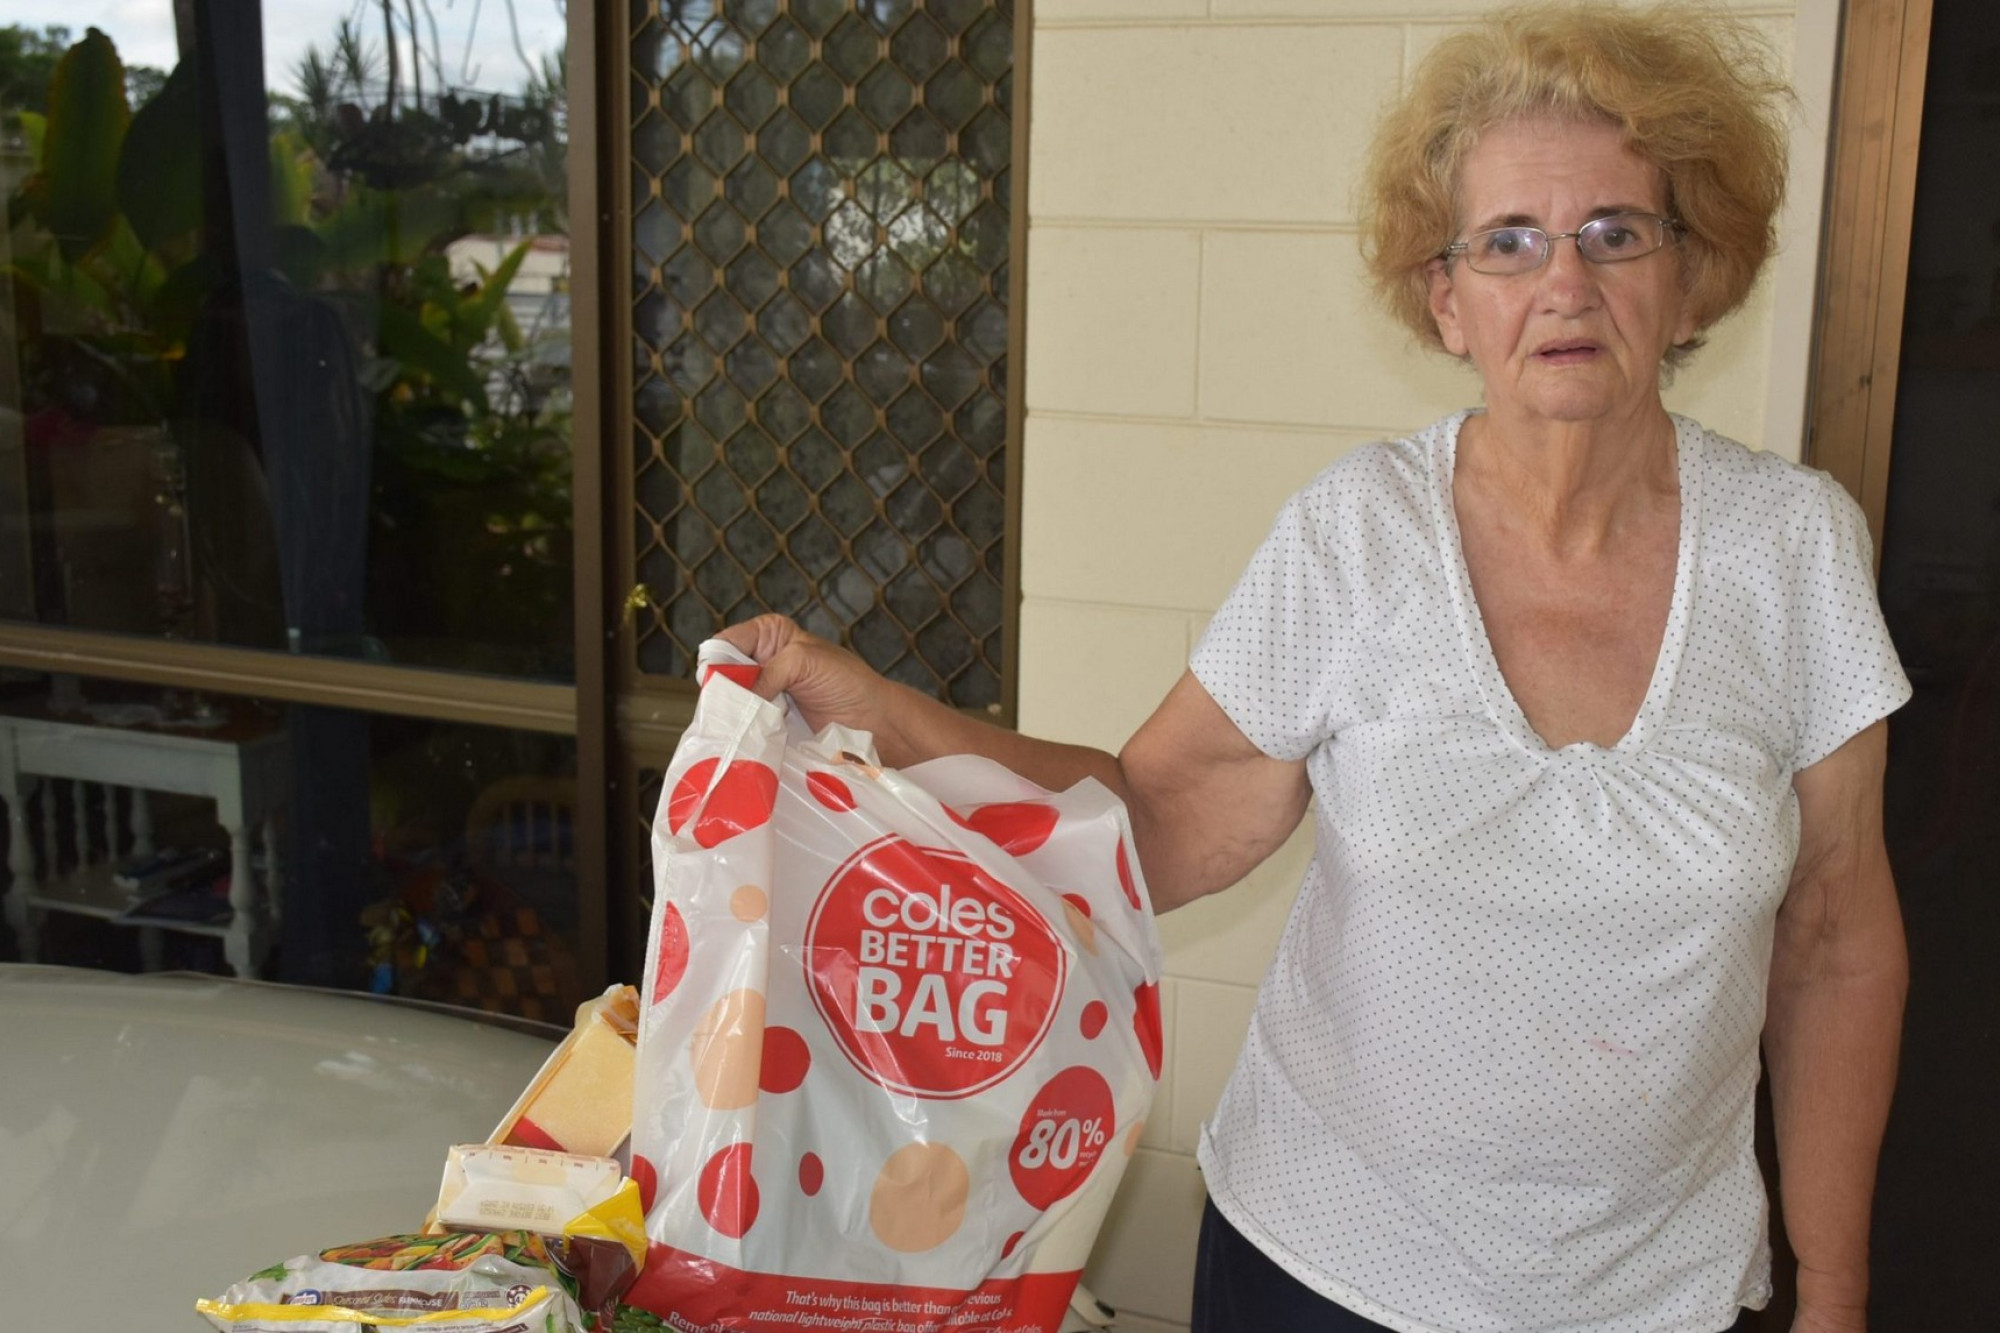 Grocery home delivery disappears - feature photo